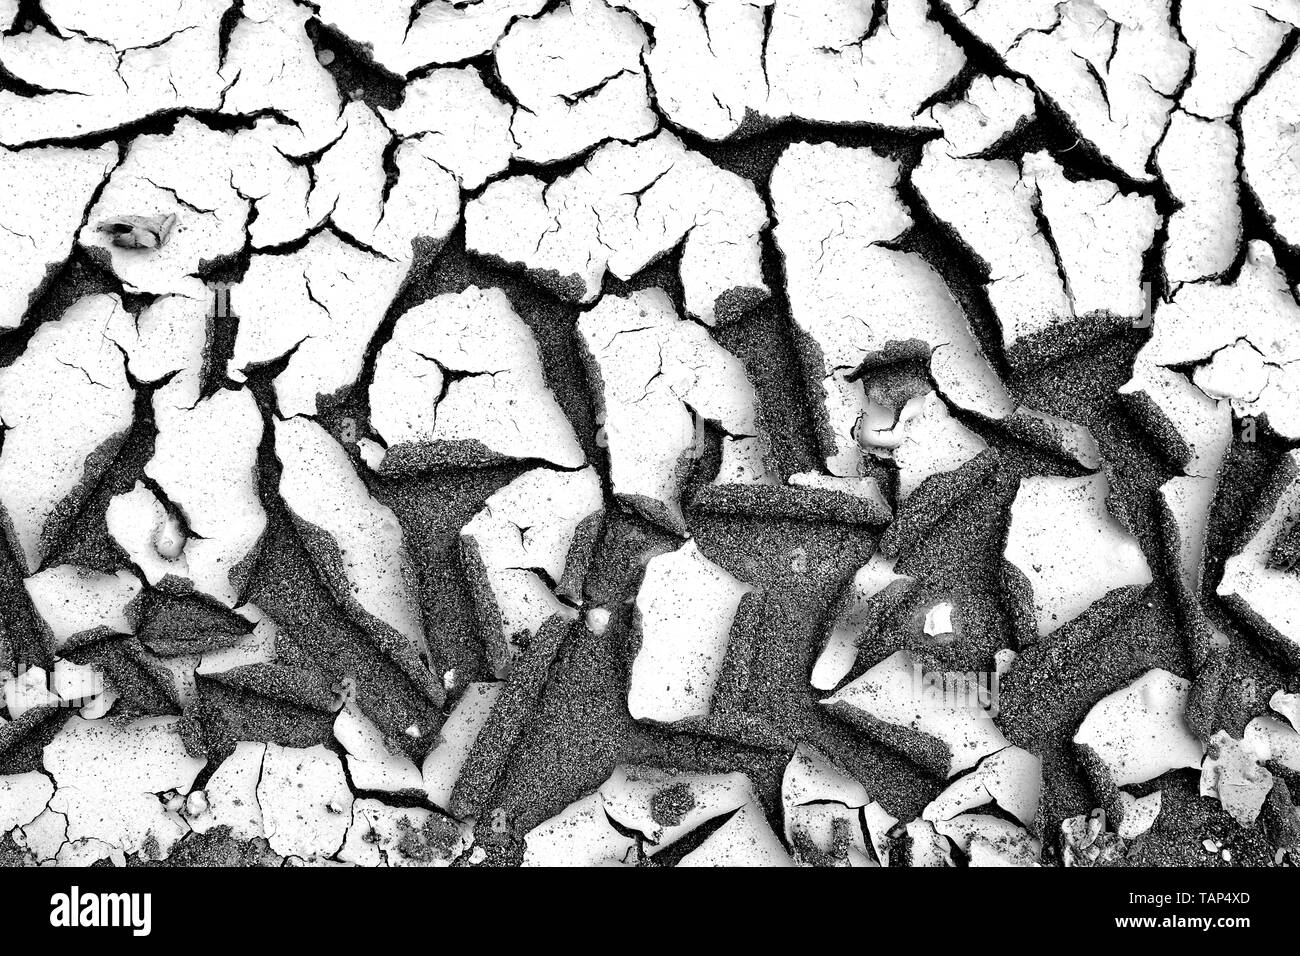 Cracked & Scorched Earth in black and white Stock Photo